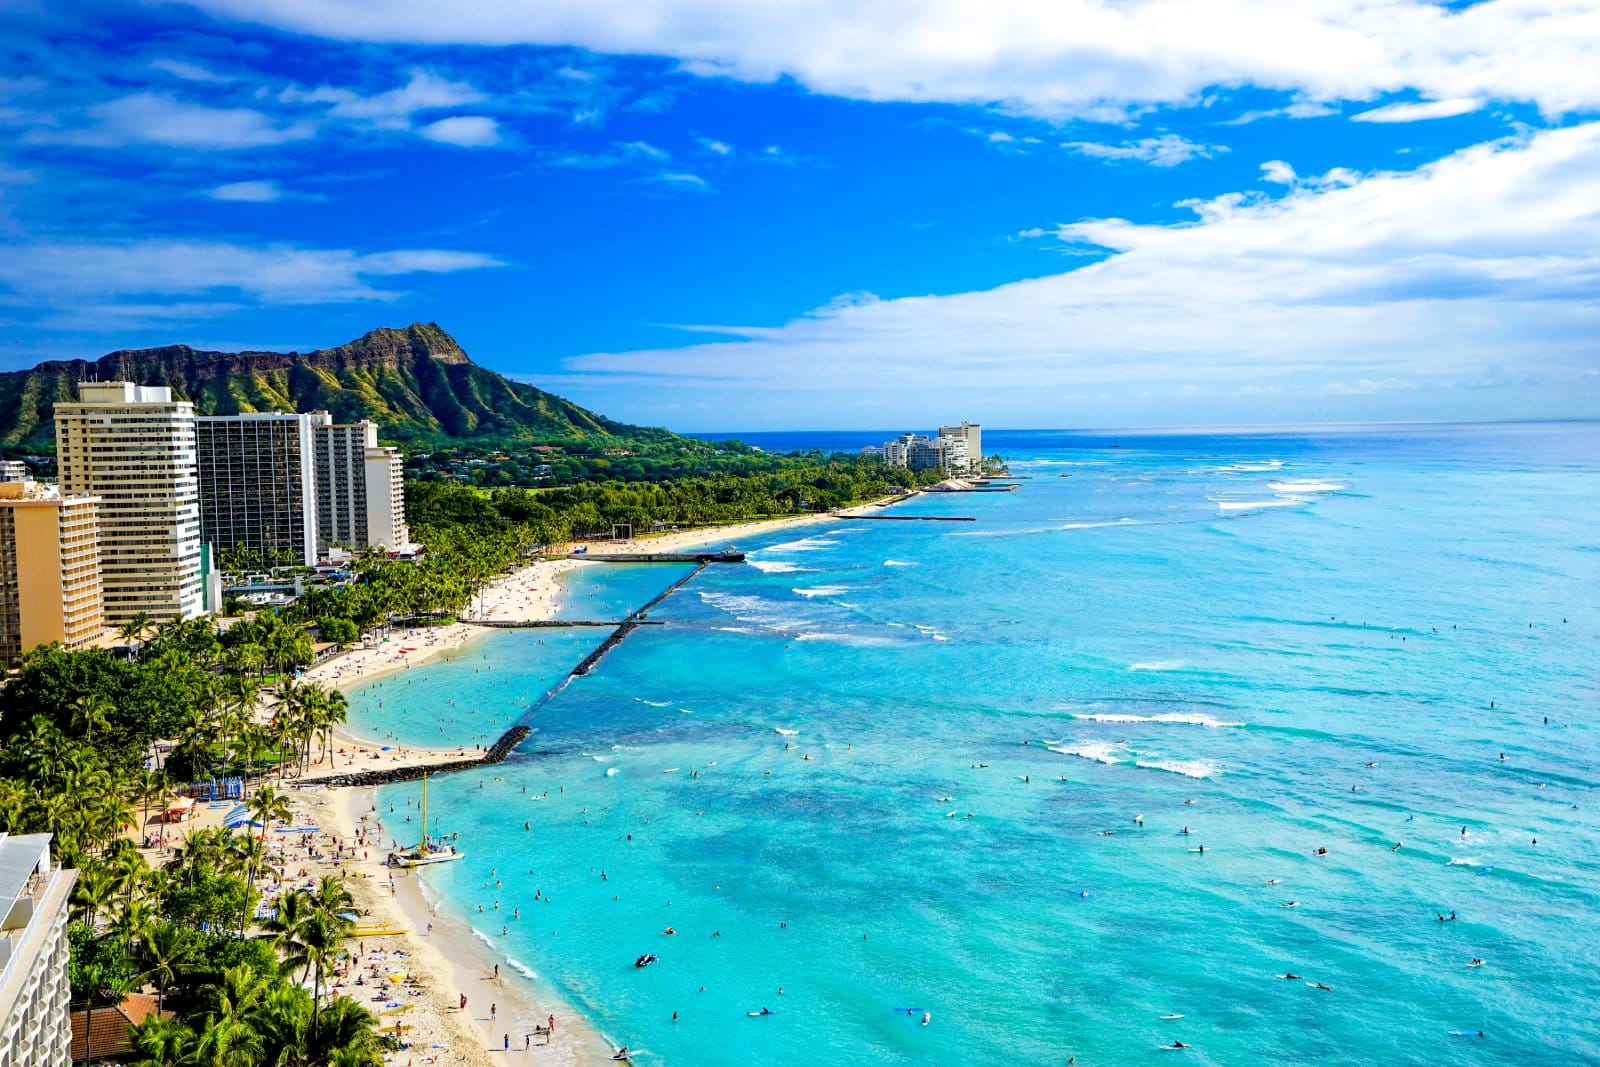 <p>Hawaii’s tourism industry generates over $17 billion. A stay at a resort can start at $250 per night, with premium experiences like helicopter tours significantly more.</p>